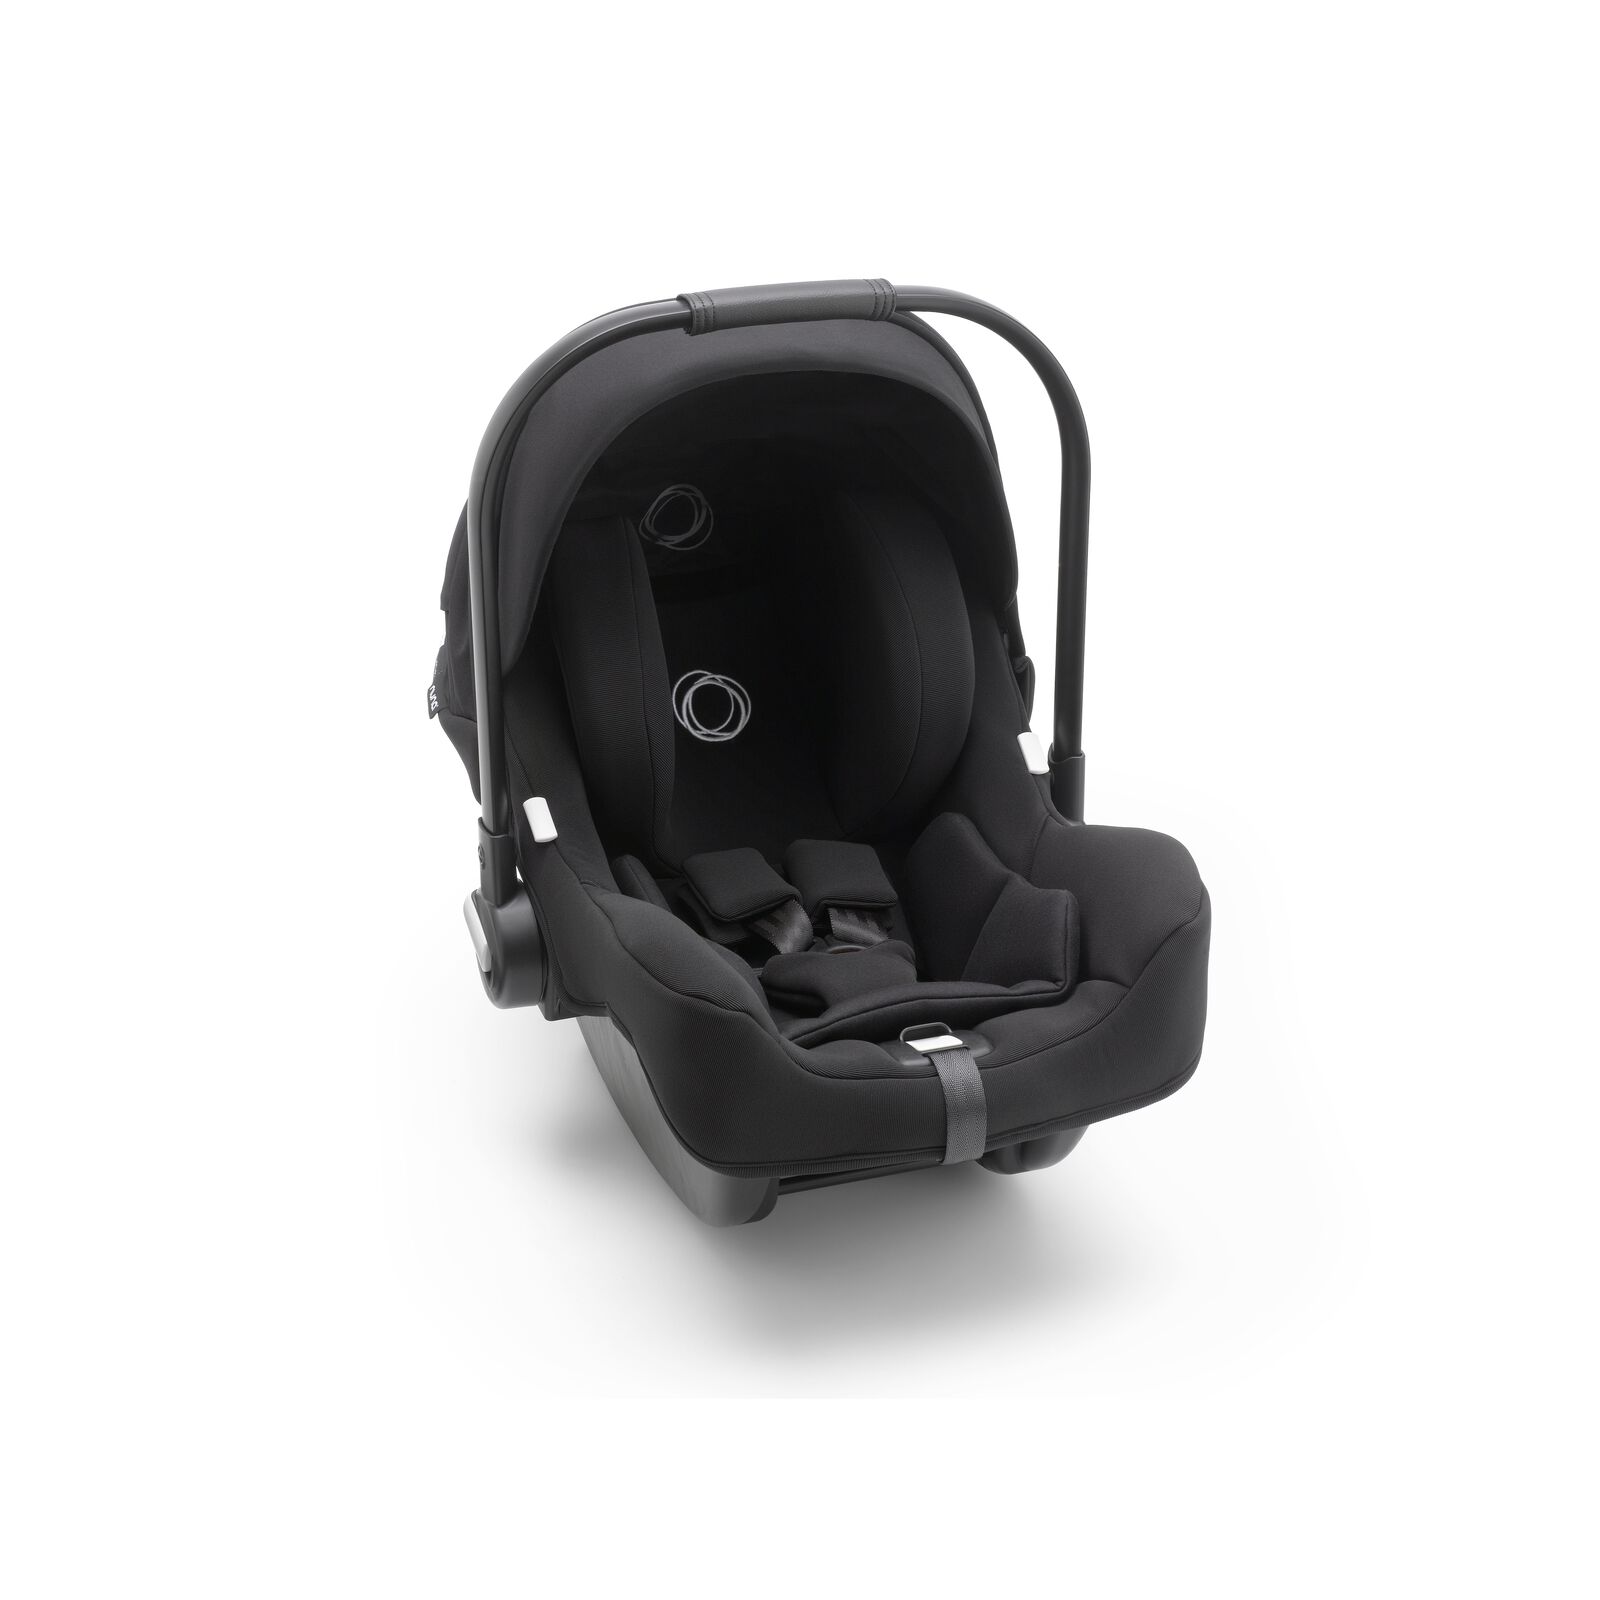 Bugaboo Turtle by Nuna baby capsule with Isofix base - View 3